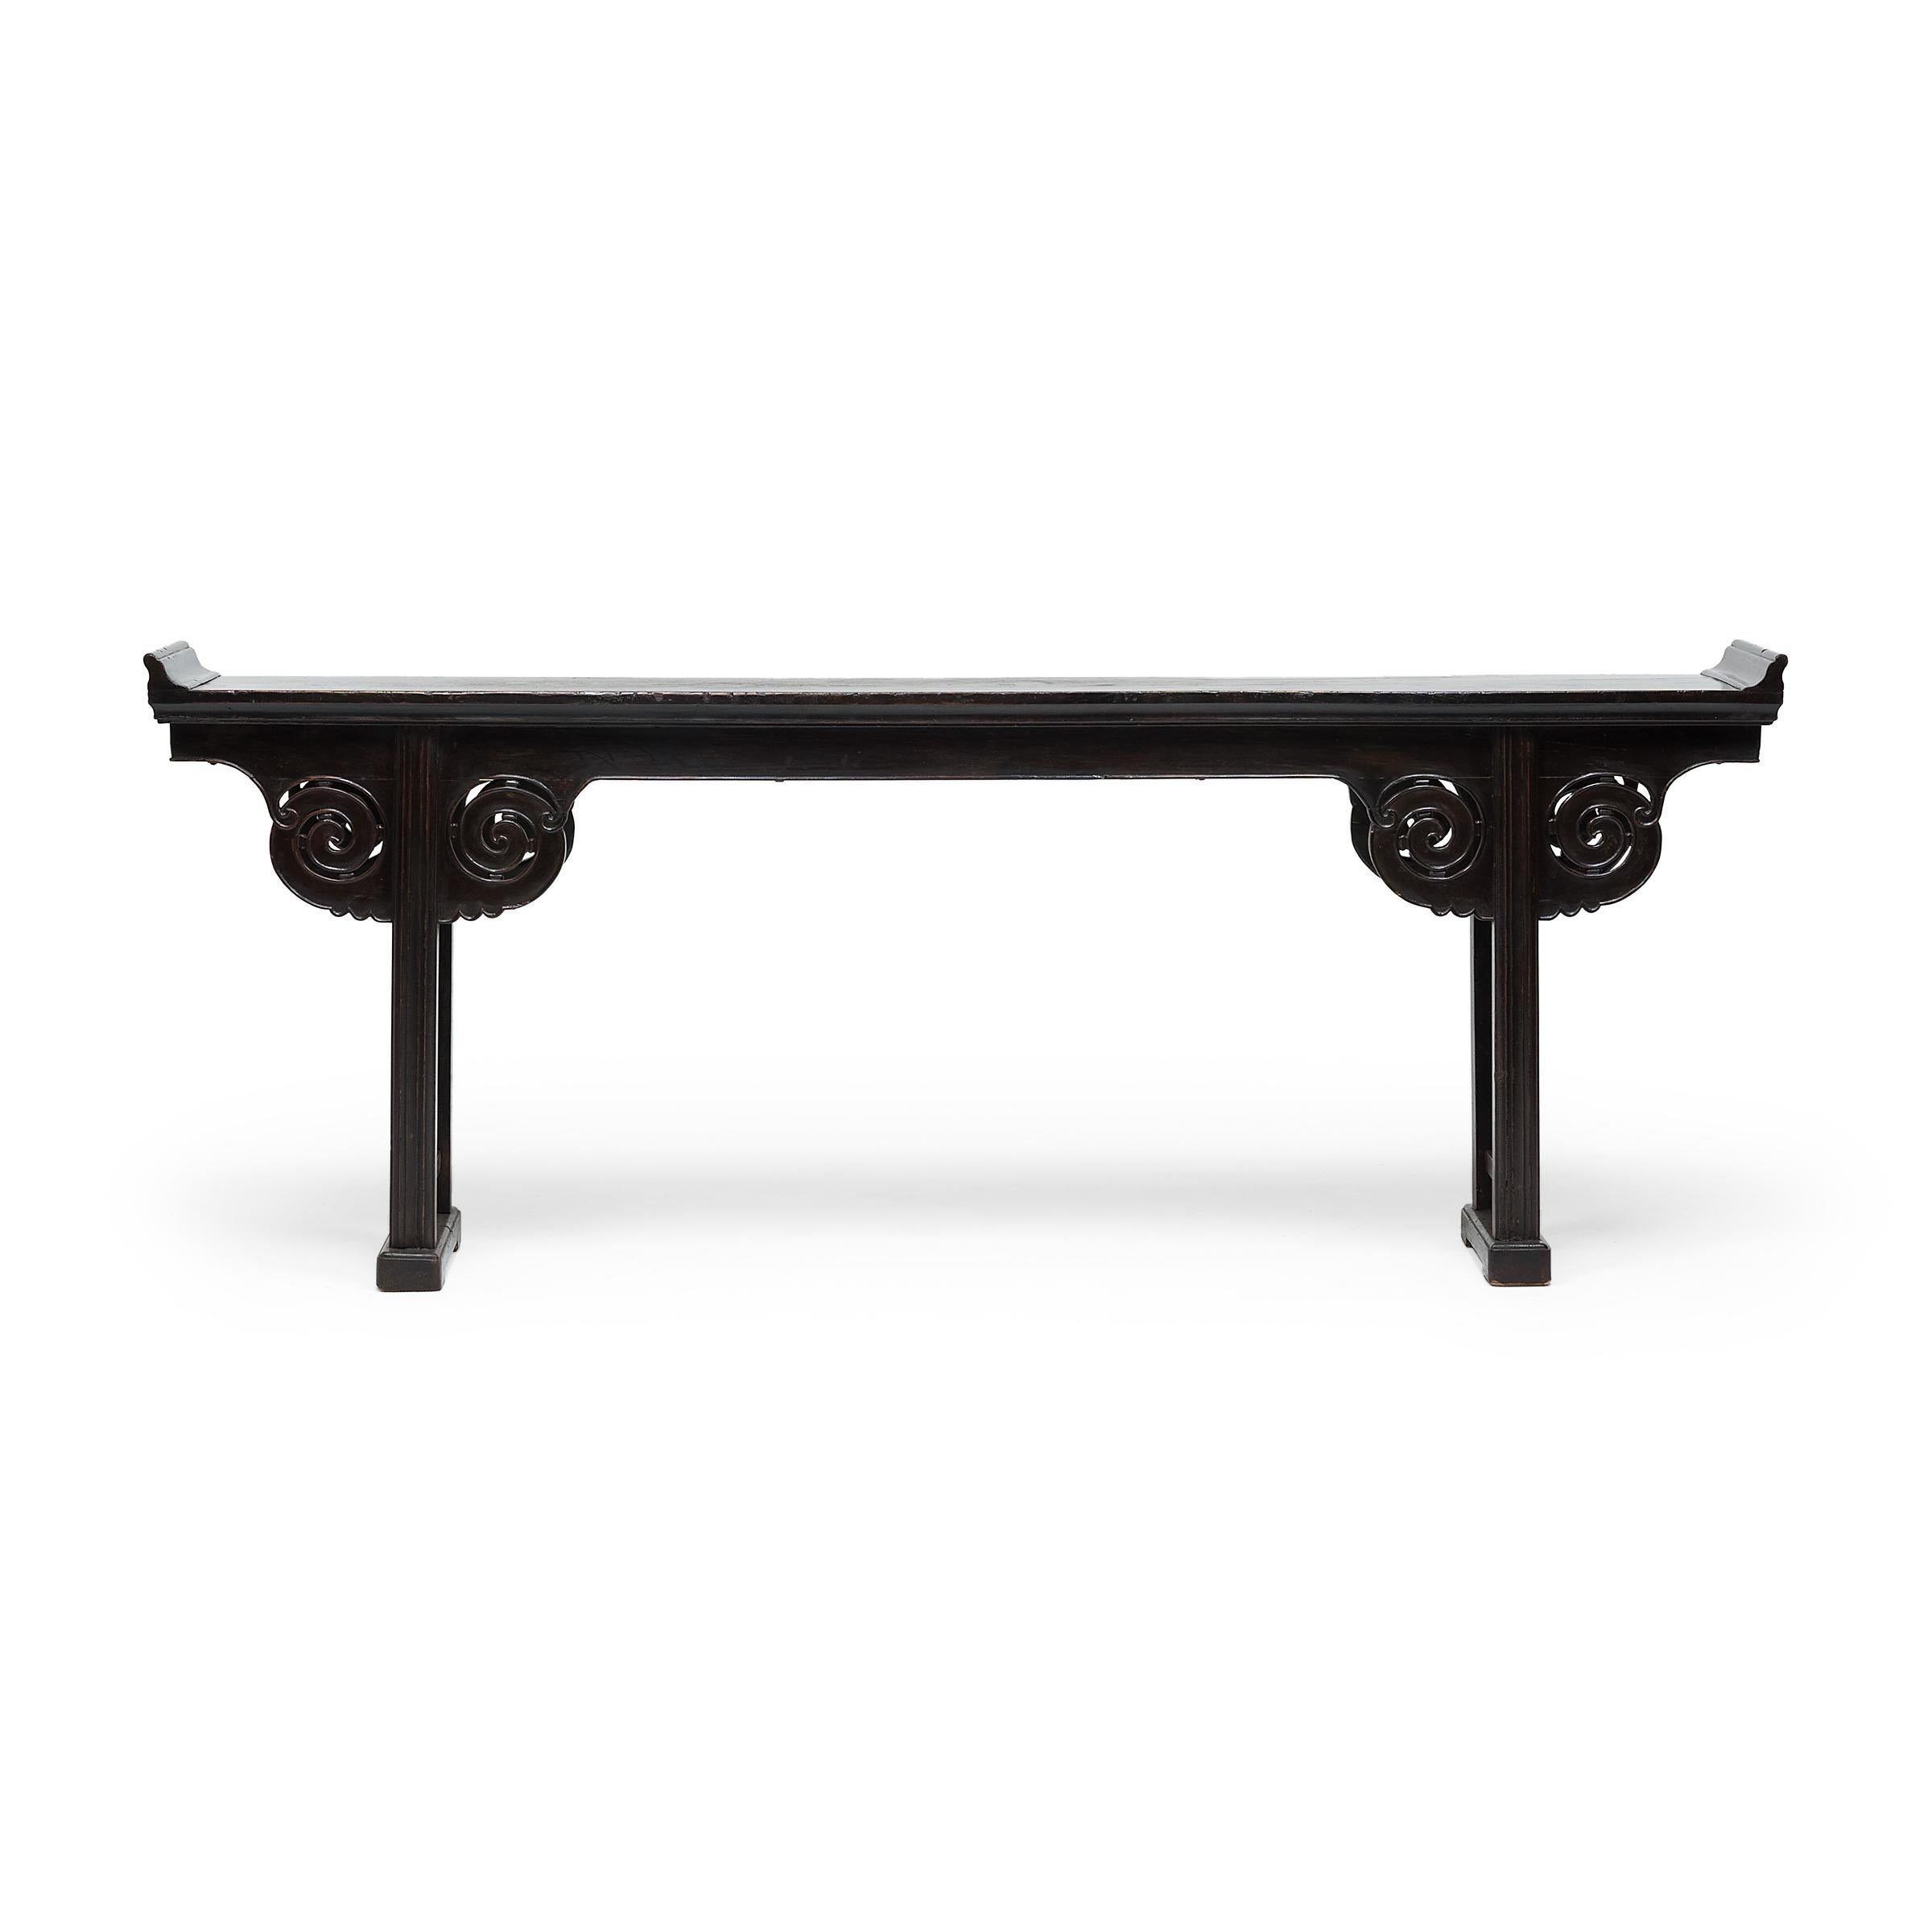 This elegant console table was expertly crafted over 150 years ago and likely served as a family’s home altar where they paid their respects to revered ancestors. The top is comprised of a solid plank of hardwood decorated with a finely beaded trim